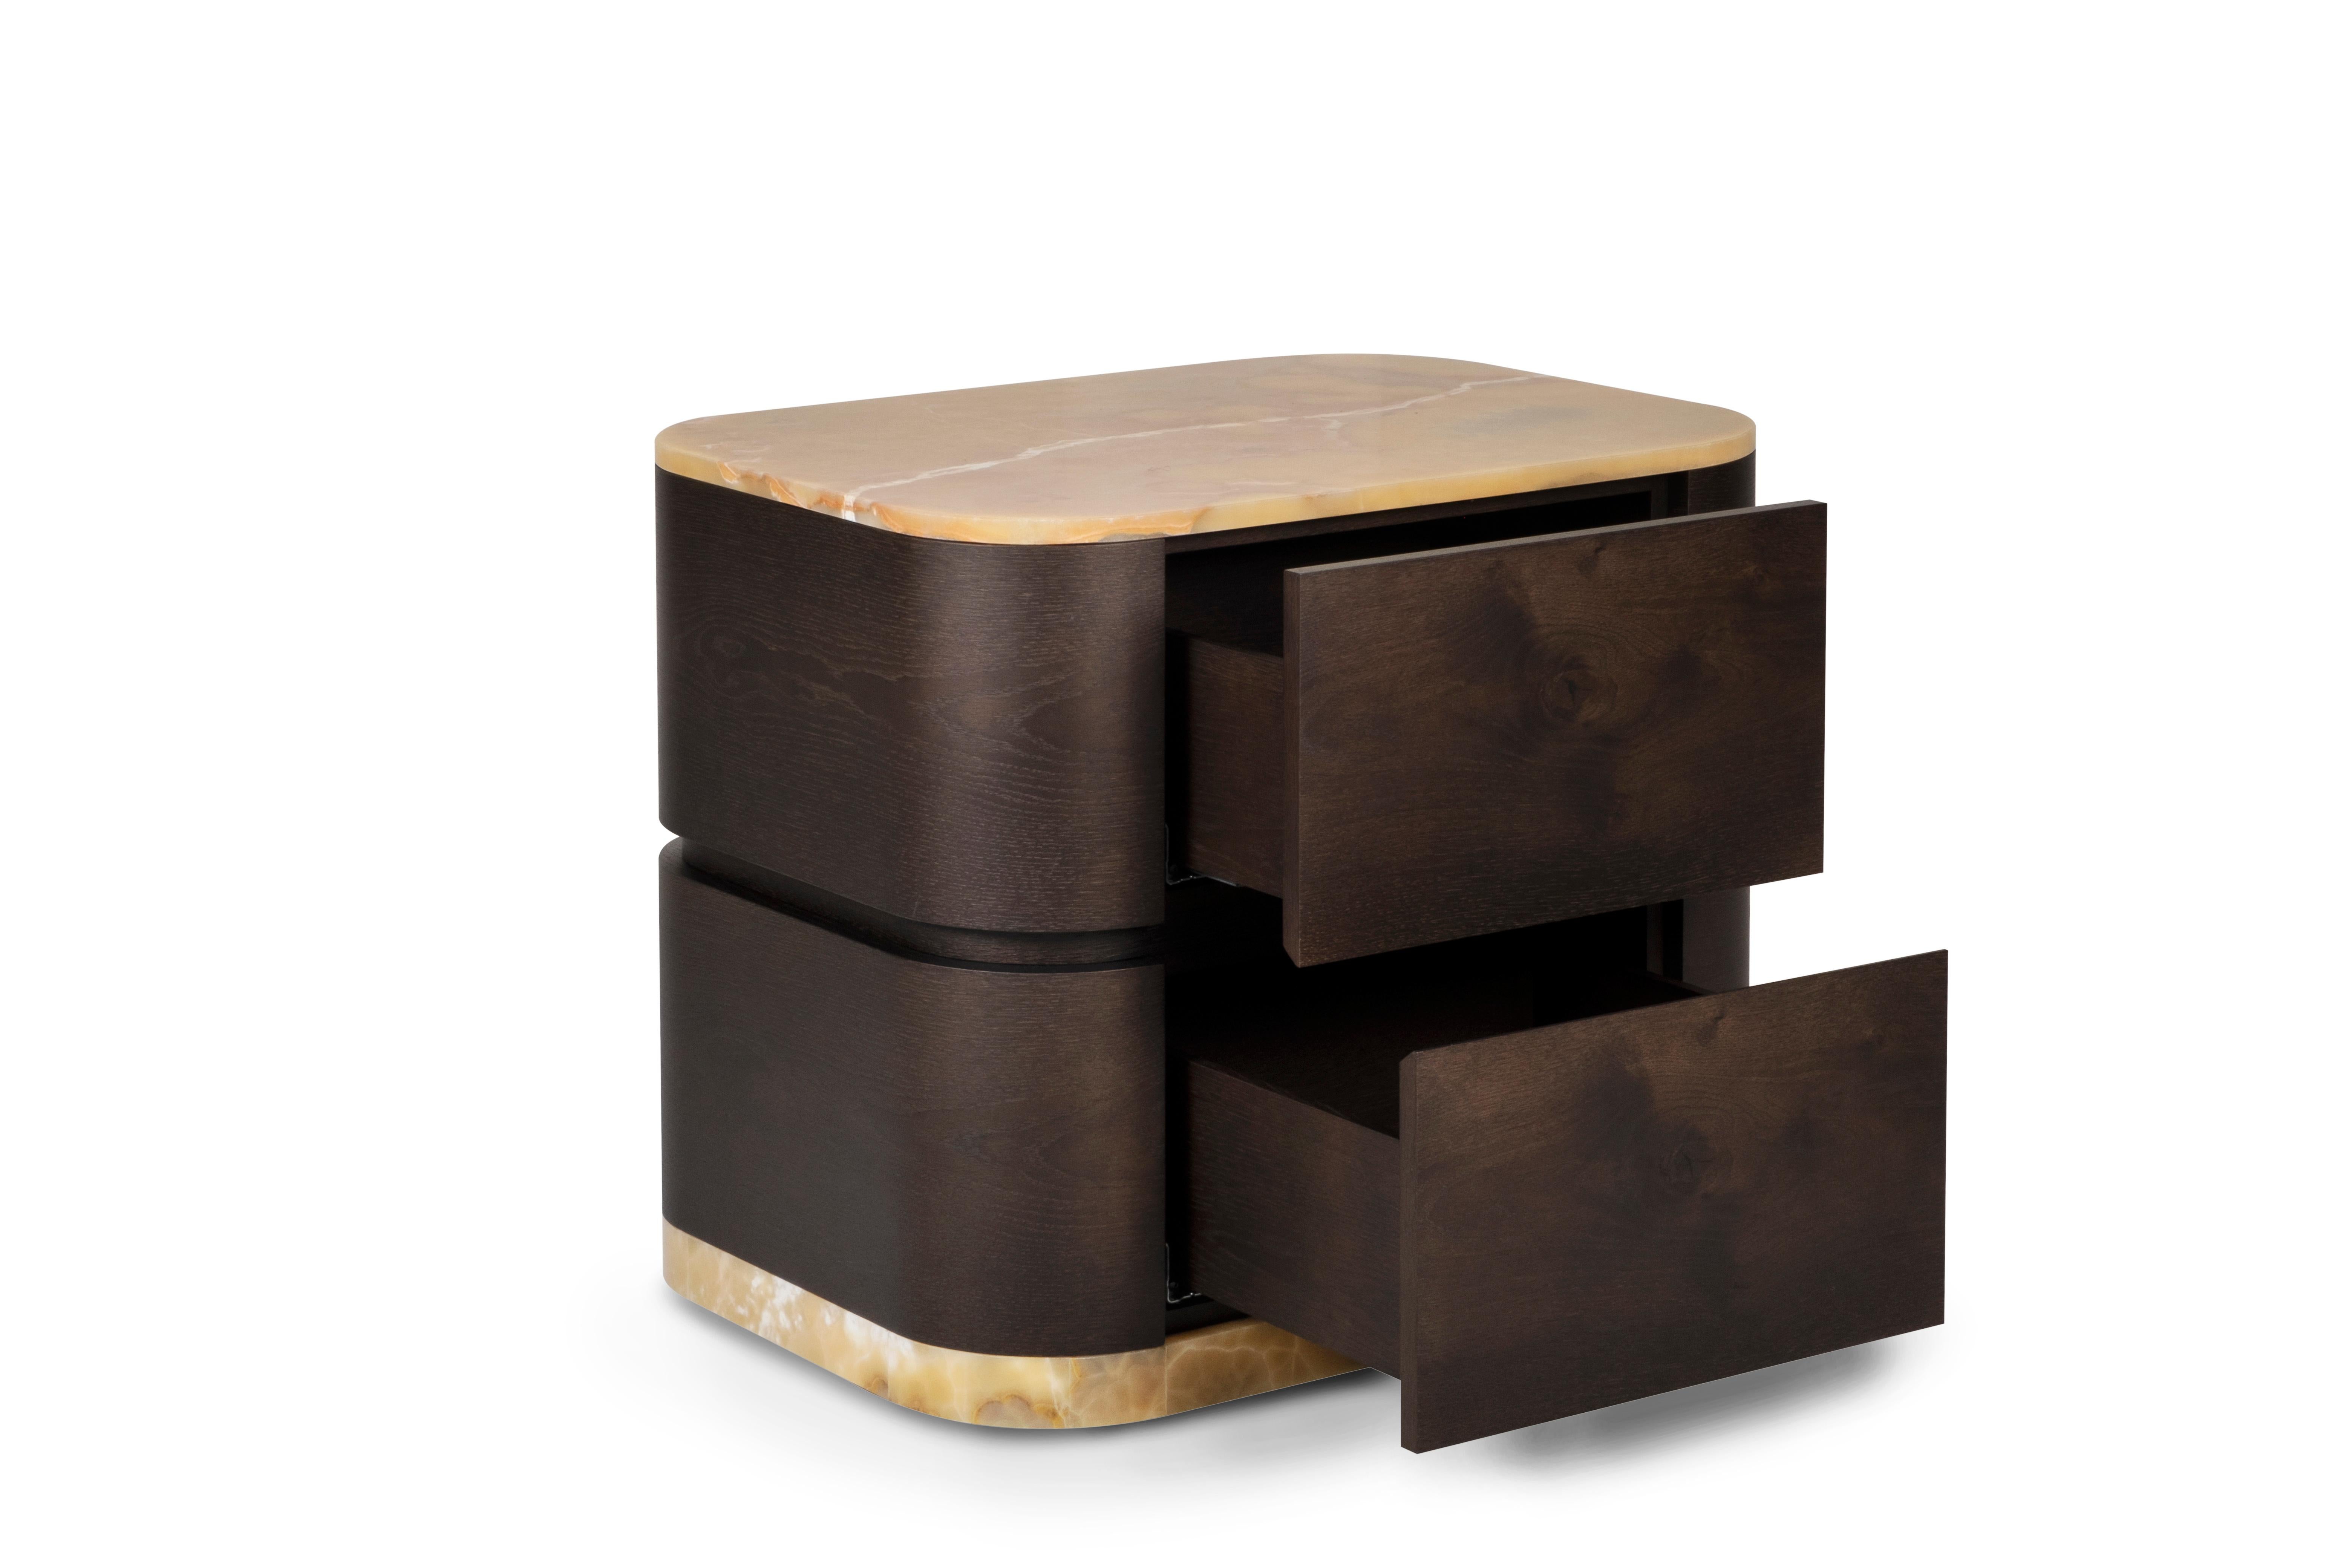 Baía Bedside Table, Modern Collection, Handcrafted in Portugal - Europe by Greenapple.

The Baía bedside table seamlessly combined fine craftsmanship with modern design. Crafted in dark-brown Oak root and miel onyx, Baía becomes an eye-catching